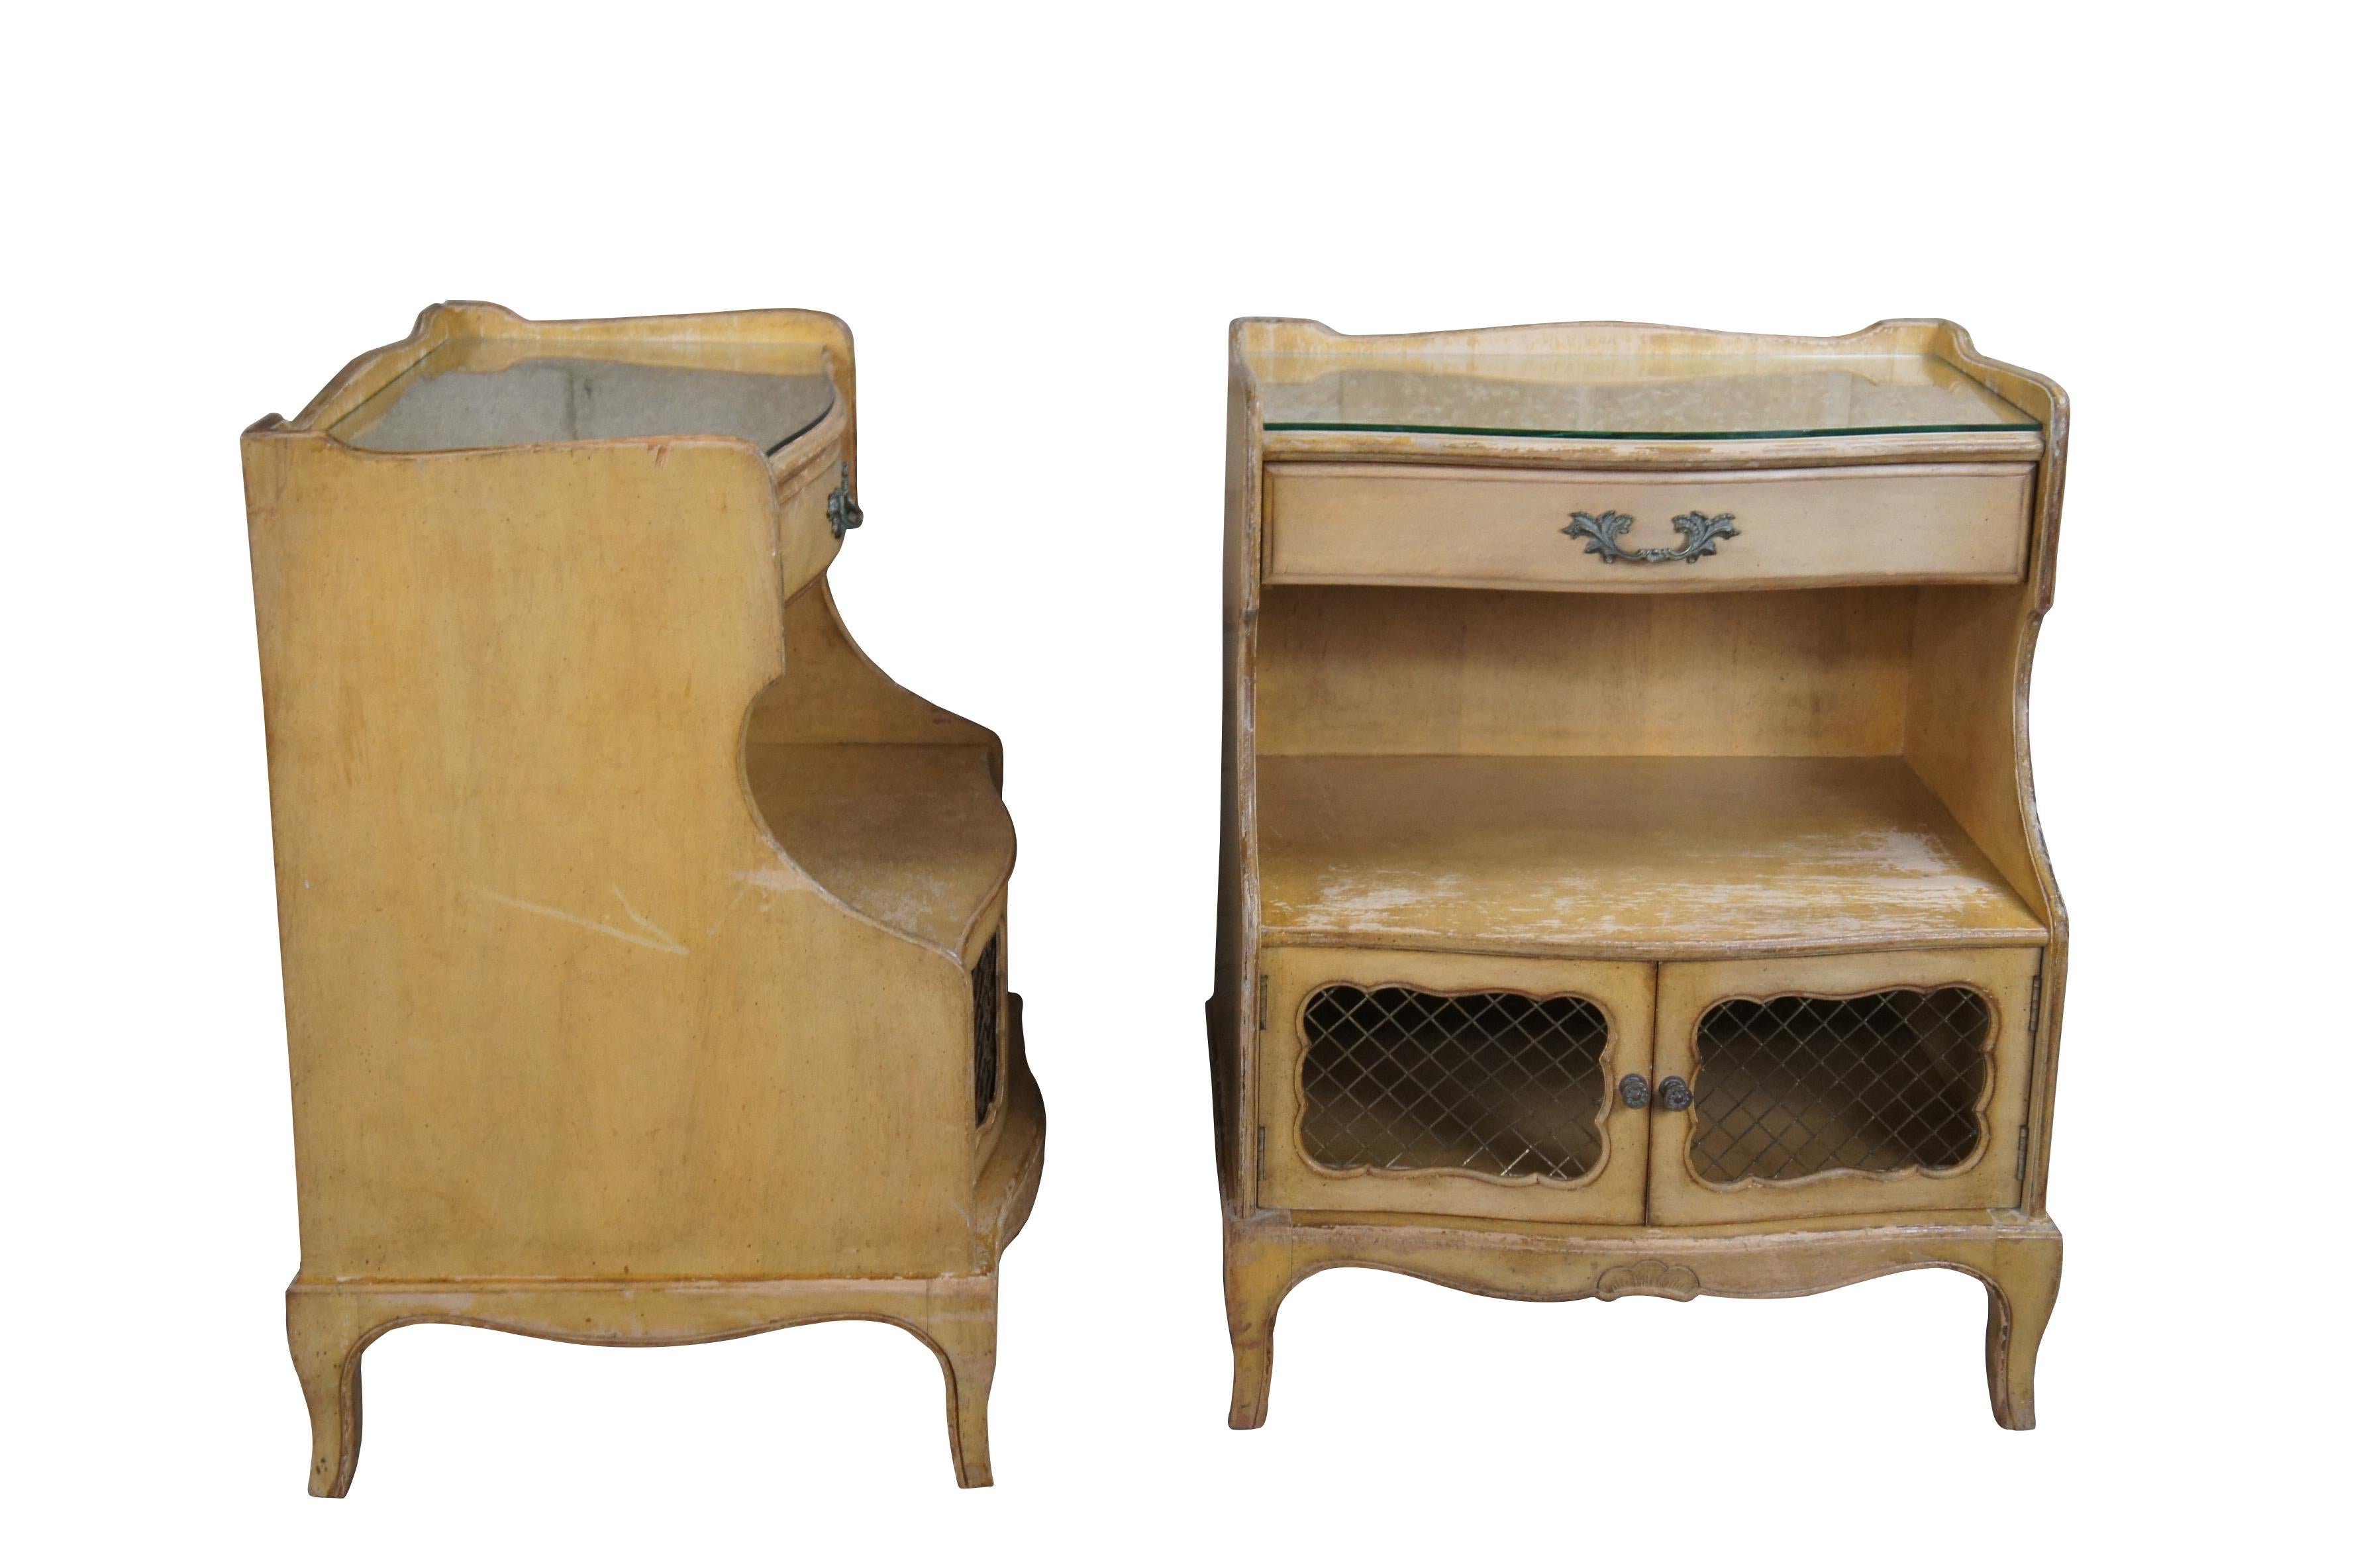 Two mid century French Provincial nightstands featuring lattice door cabinet, two tiers, drawers and upper gallery.  Includes glass top.  Attributed to Bethlehem Furniture Co.  A great candidate for refinishing or painting.

Dimensions:
19.5